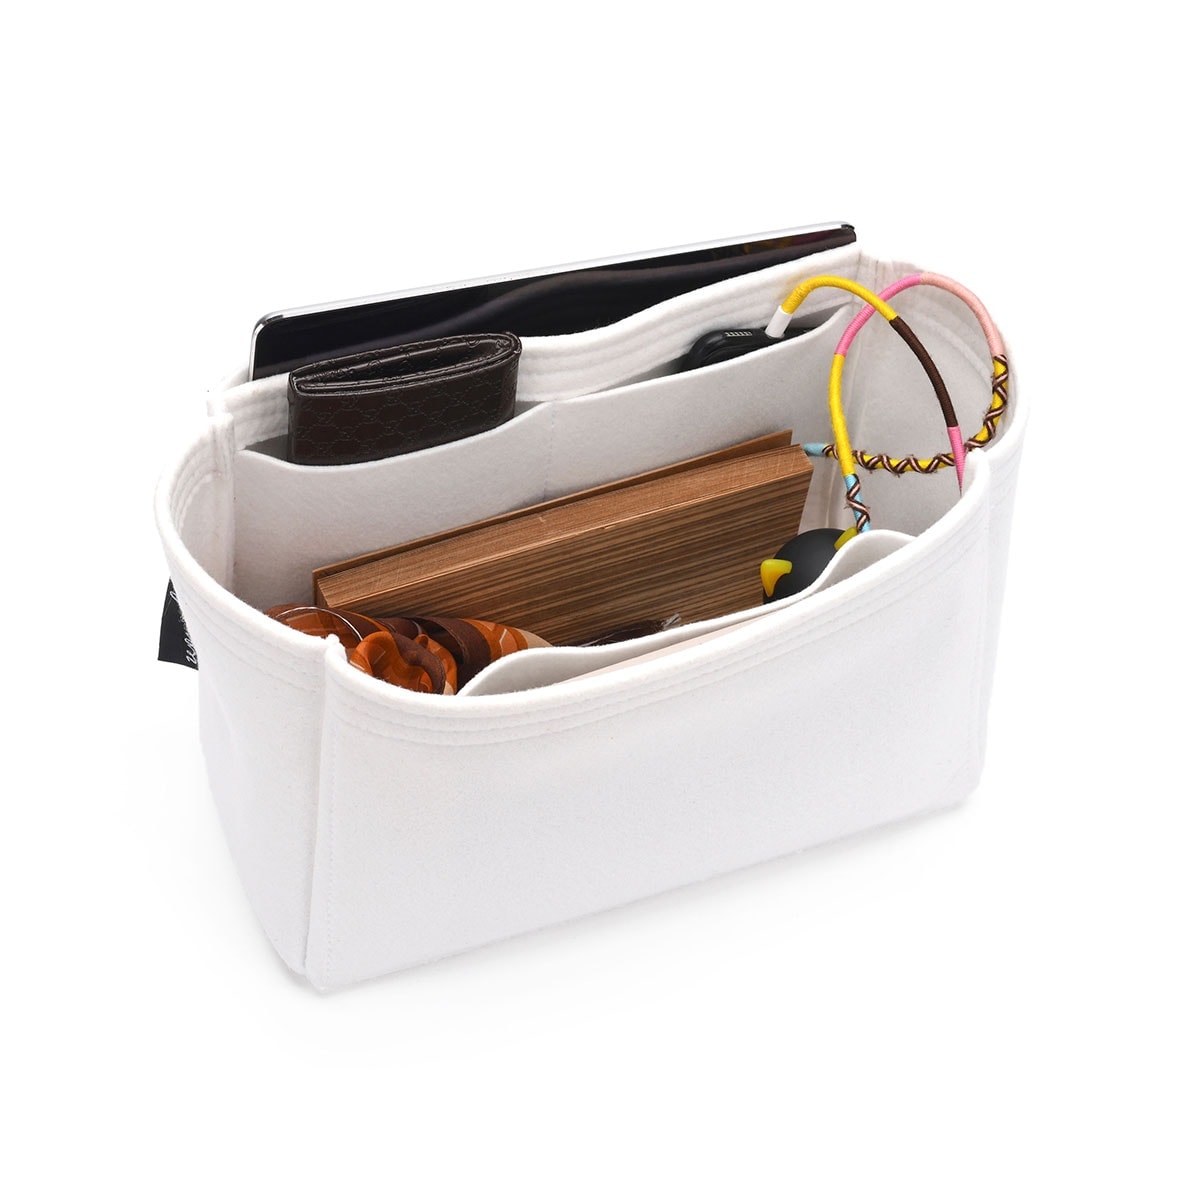 Bag and Purse Organizer with Singular Style for Hermes Picotin Models